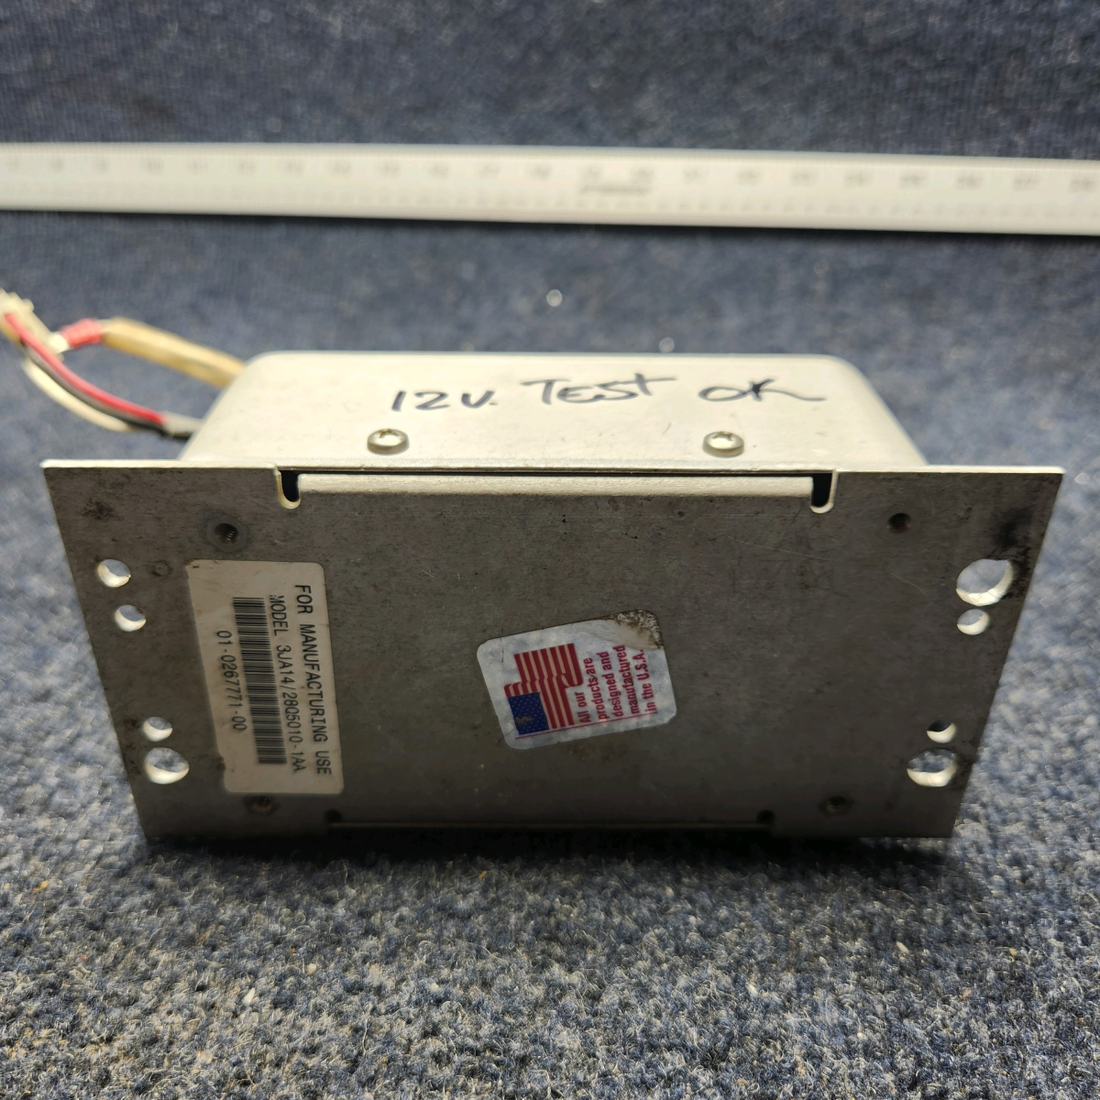 Used aircraft parts for sale, A490, T1-28 Whelen Strobe Power Supply WHELEN STROBE LIGHT POWER SUPPLY 28 VOLTS